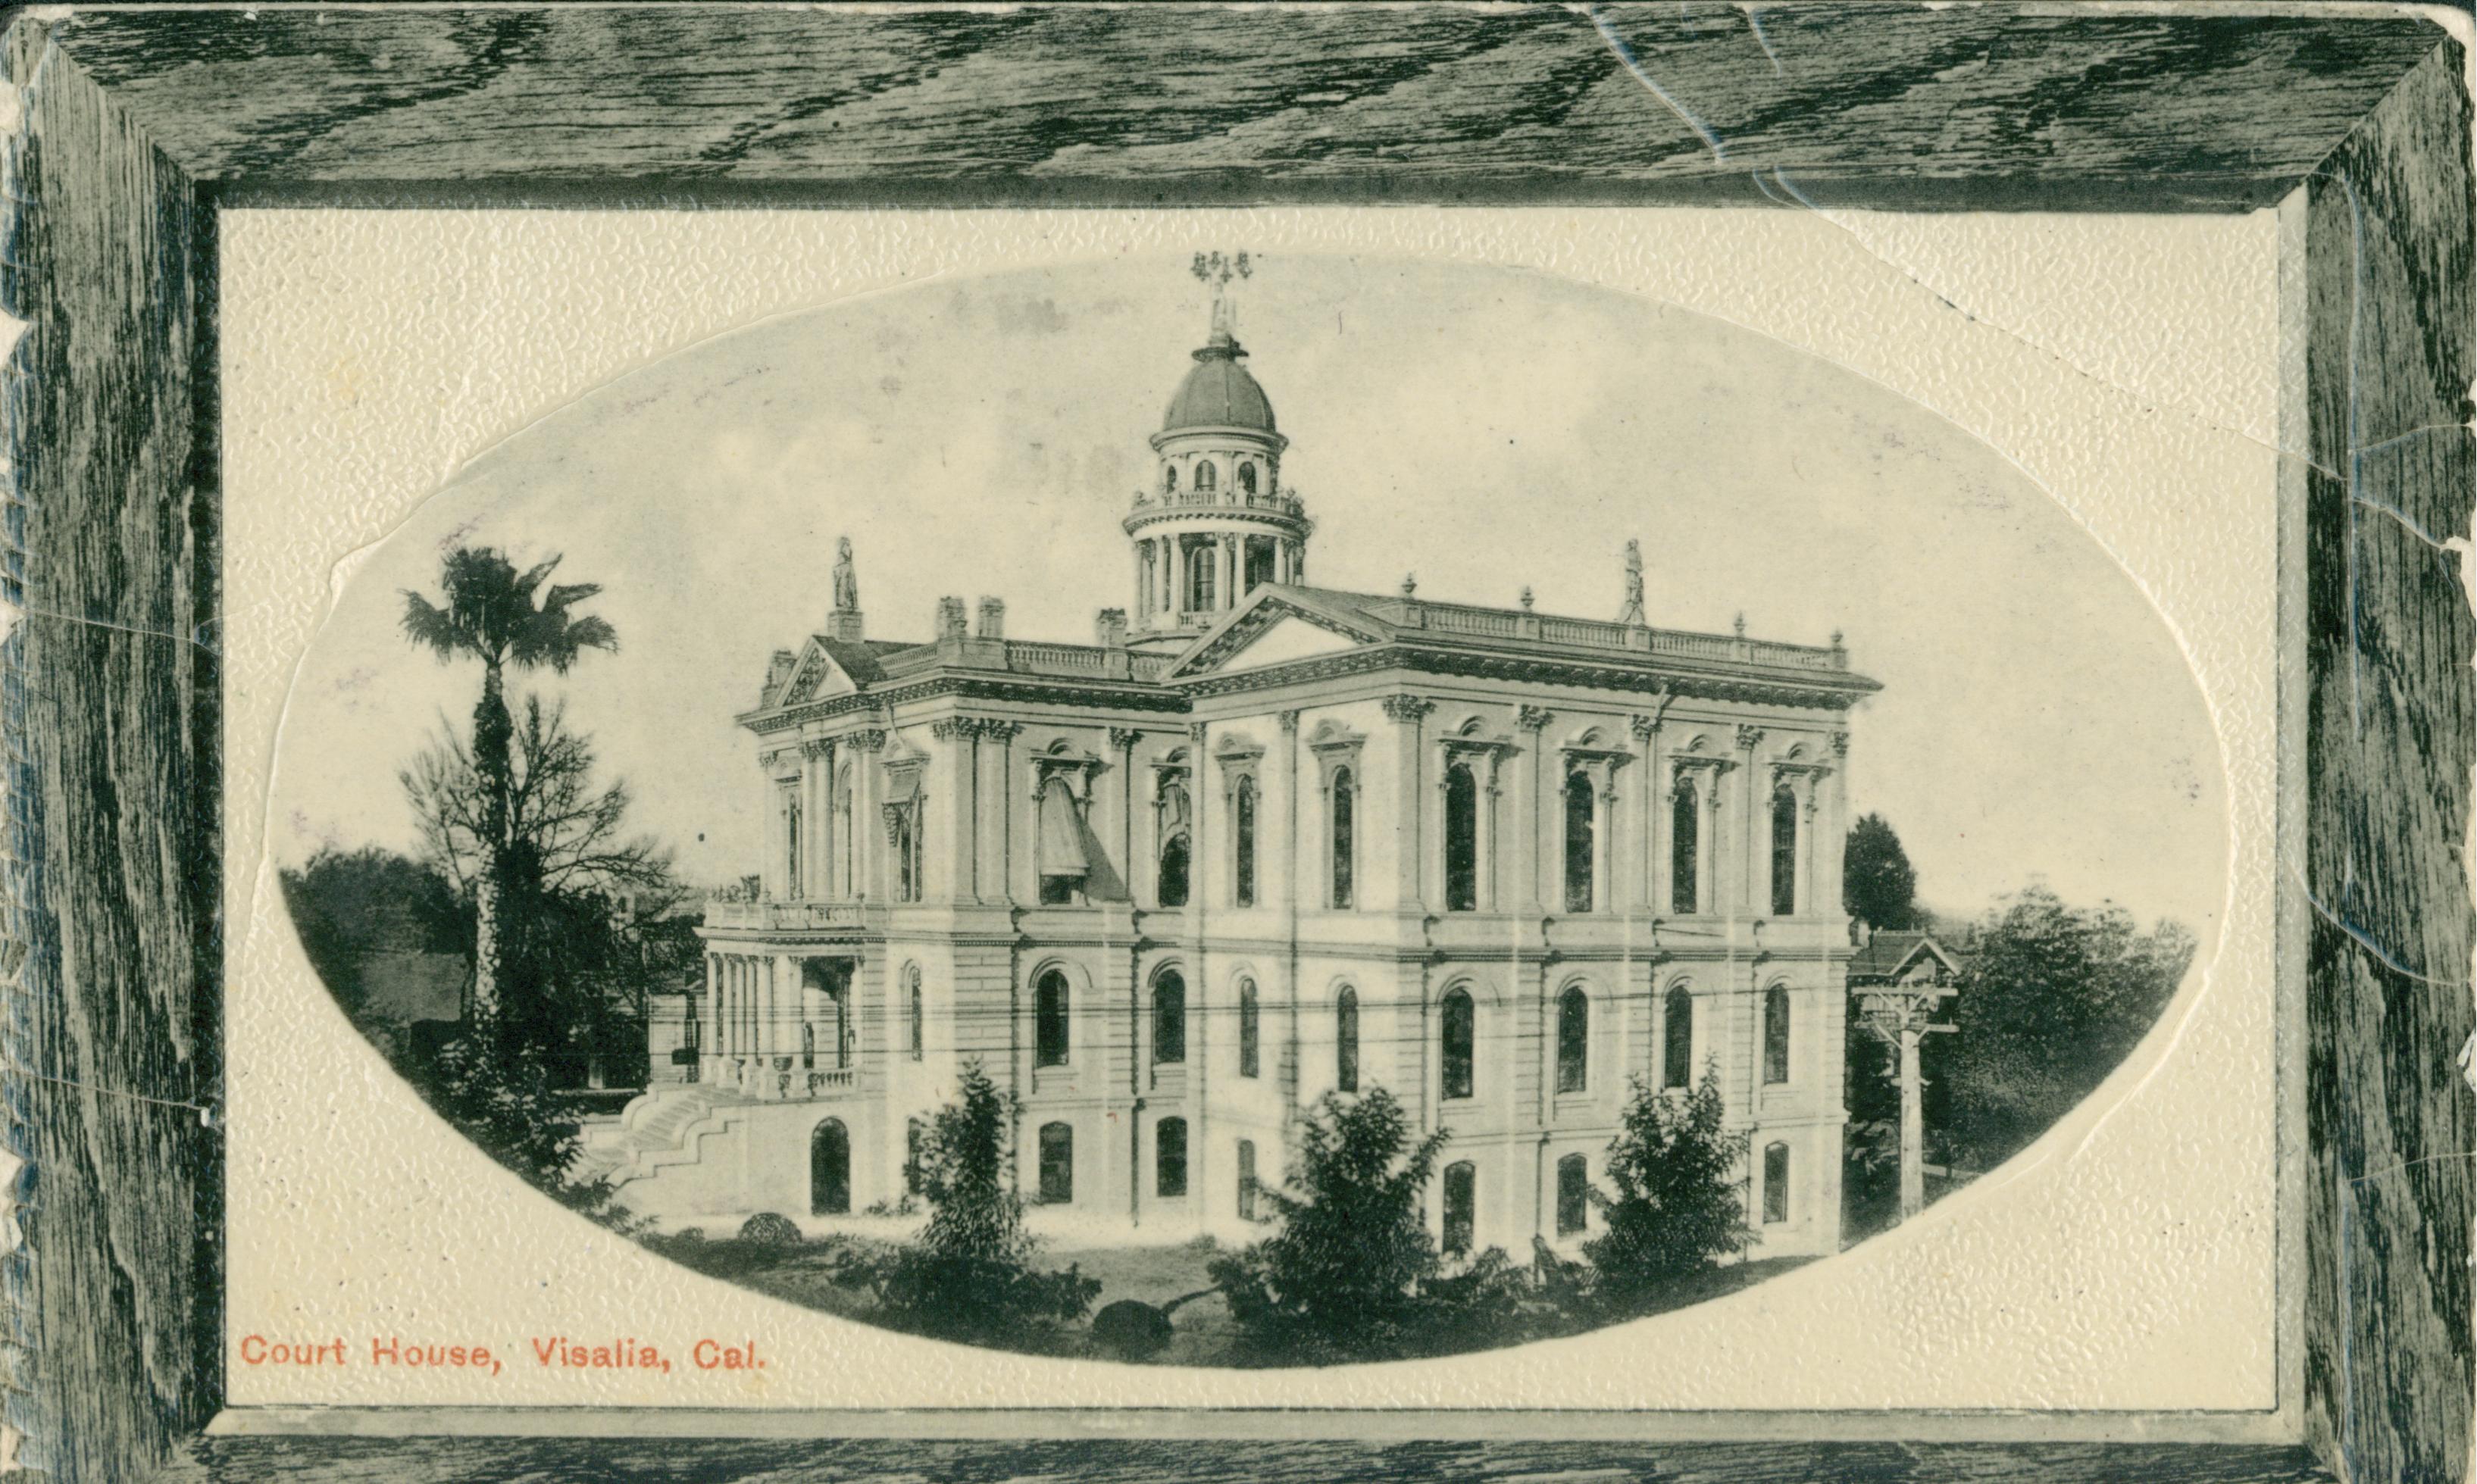 Shows a corner view of Visalia Courthouse